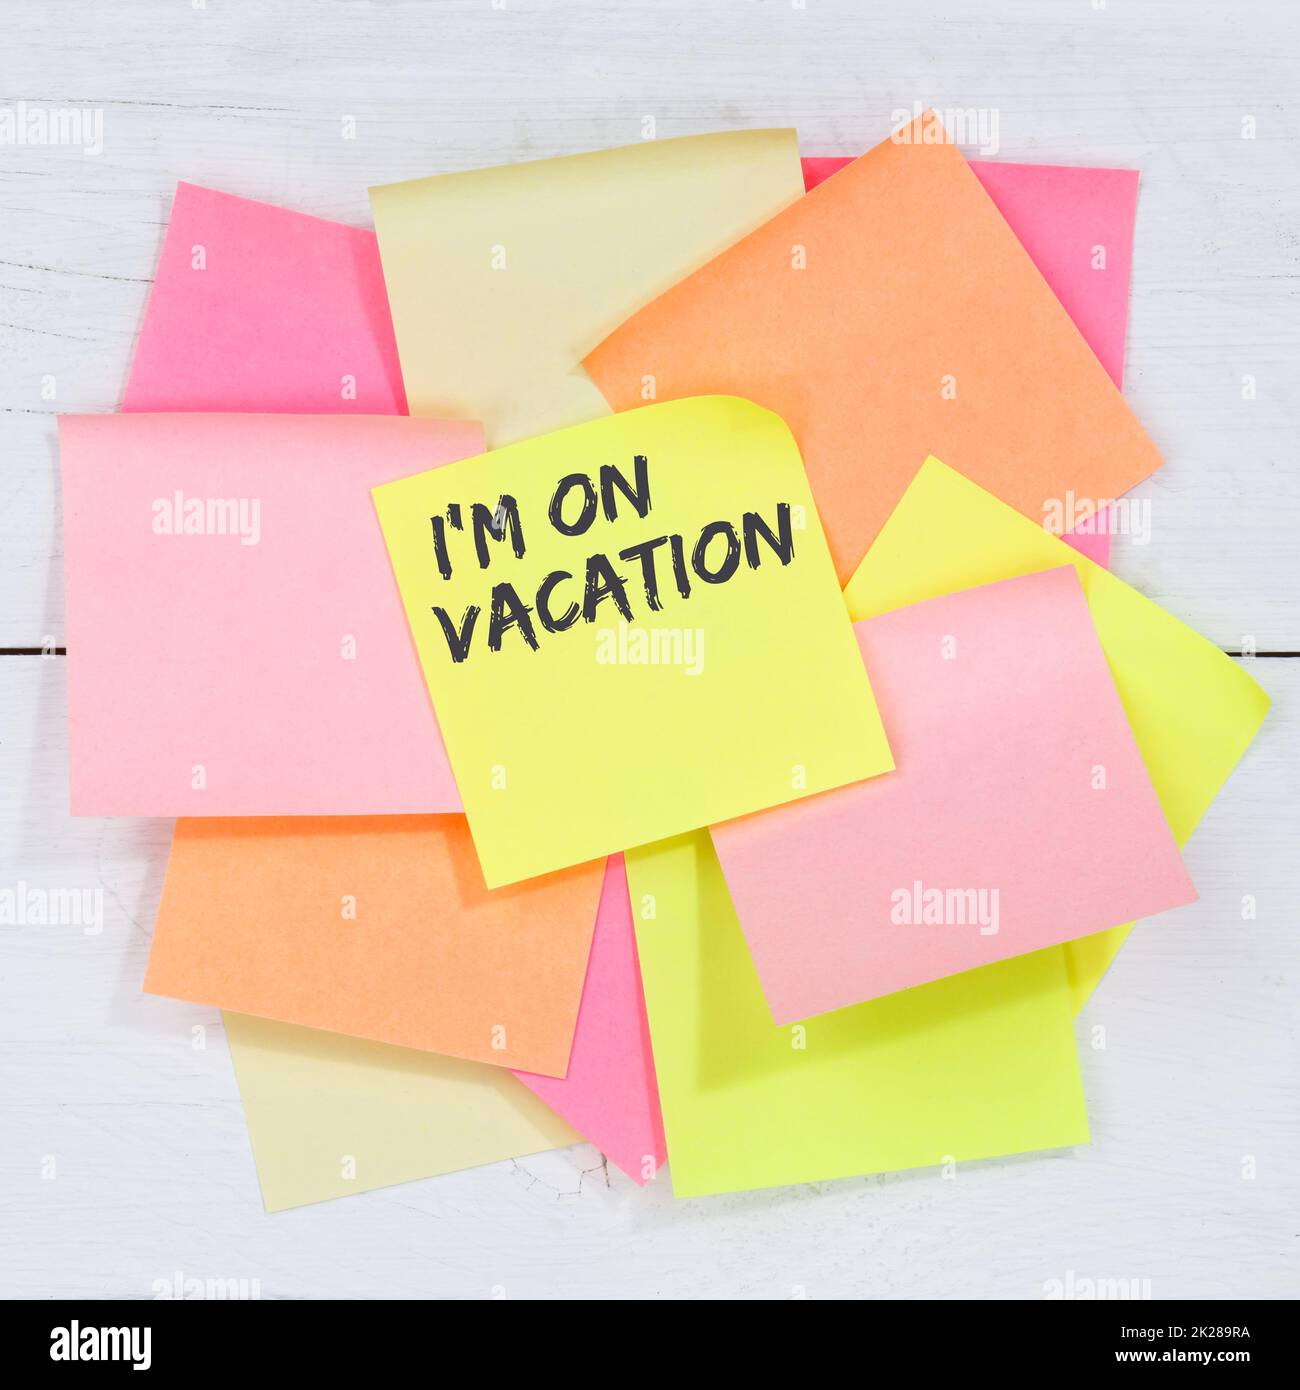 I'm on vacation travel traveling holiday holidays relax relaxed break free time business concept desk note paper notepaper Stock Photo